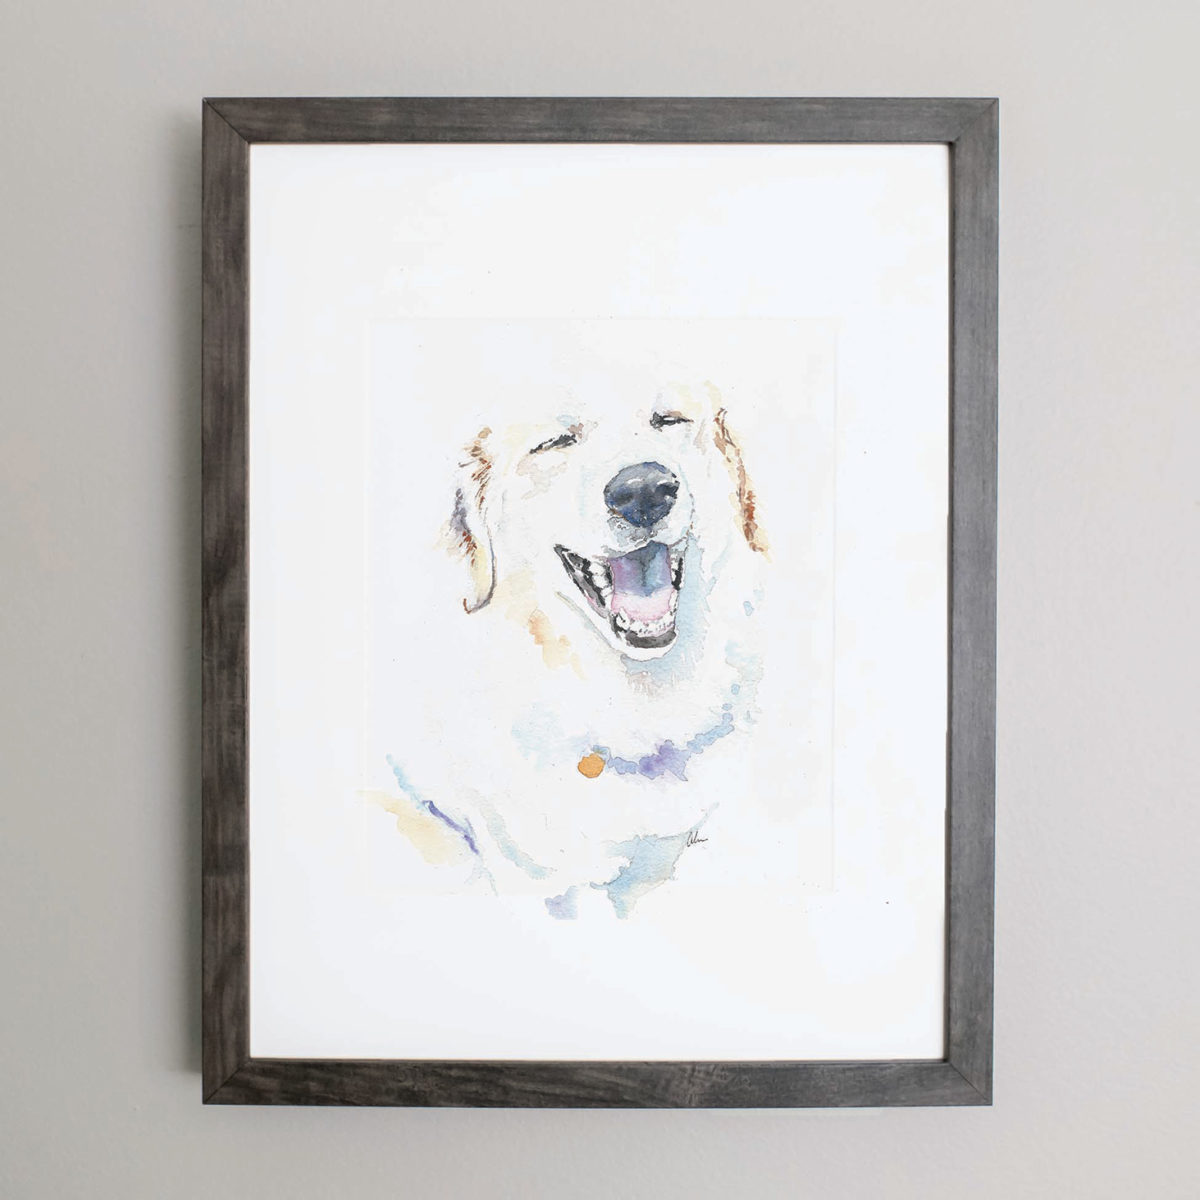 Watercolor of a white dog in a gray frame